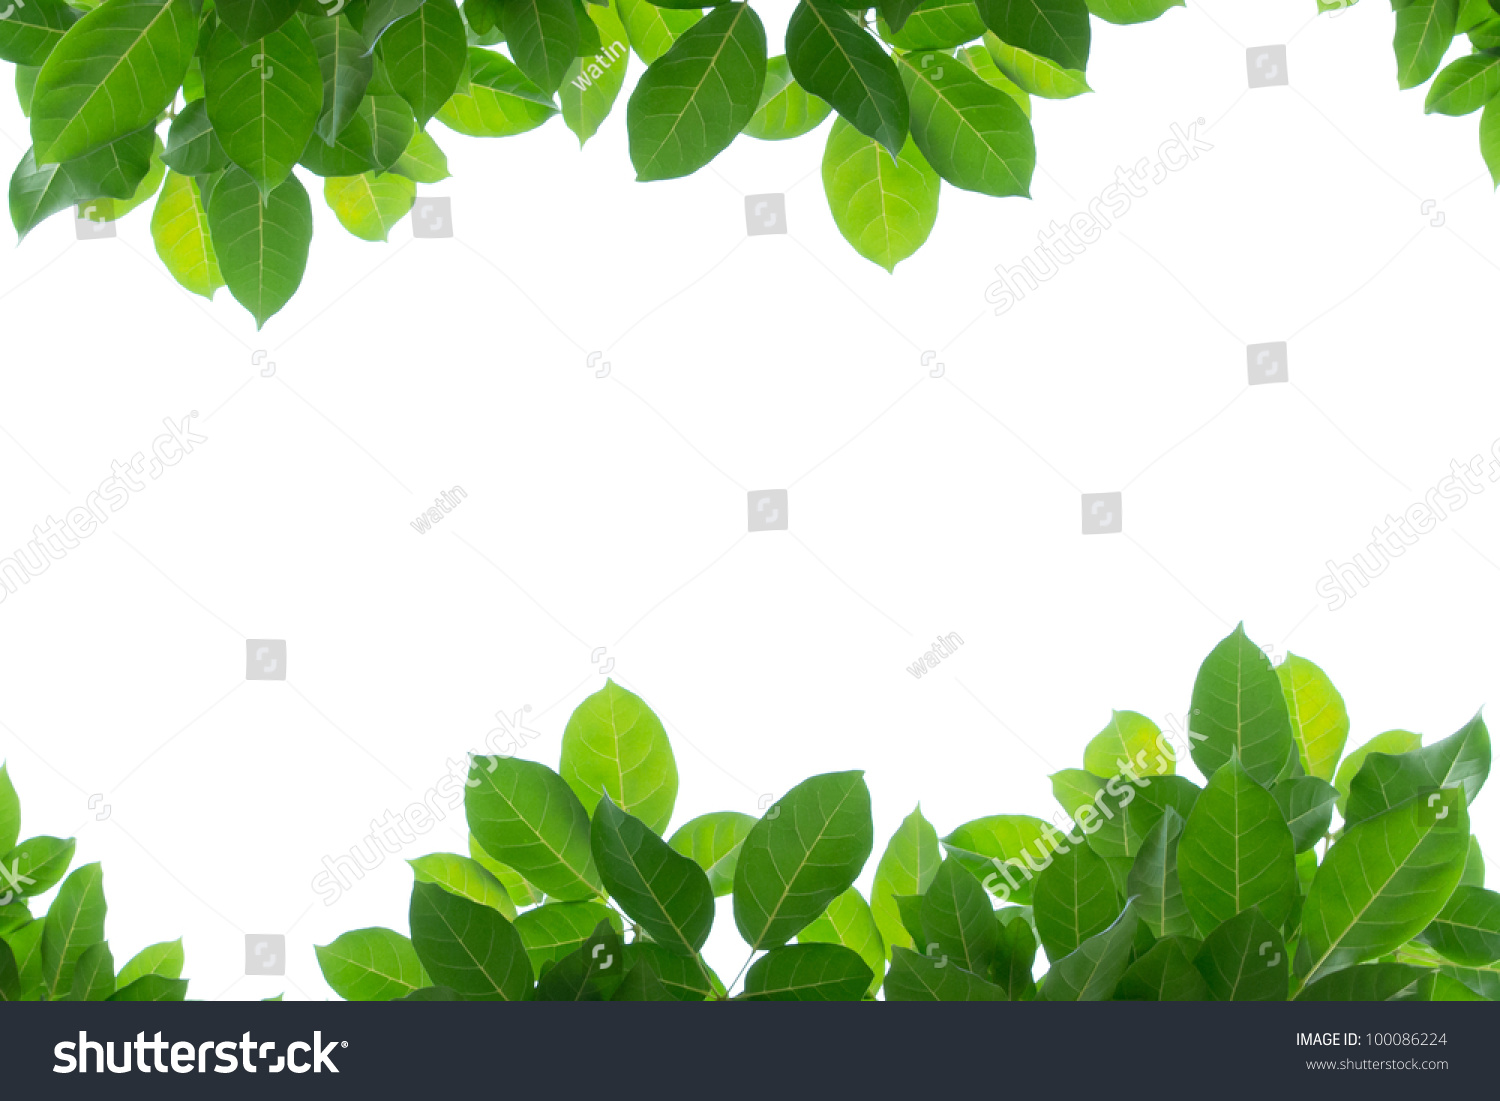 Green Leaf Isolated Background Stock Photo 100086224 : Shutterstock